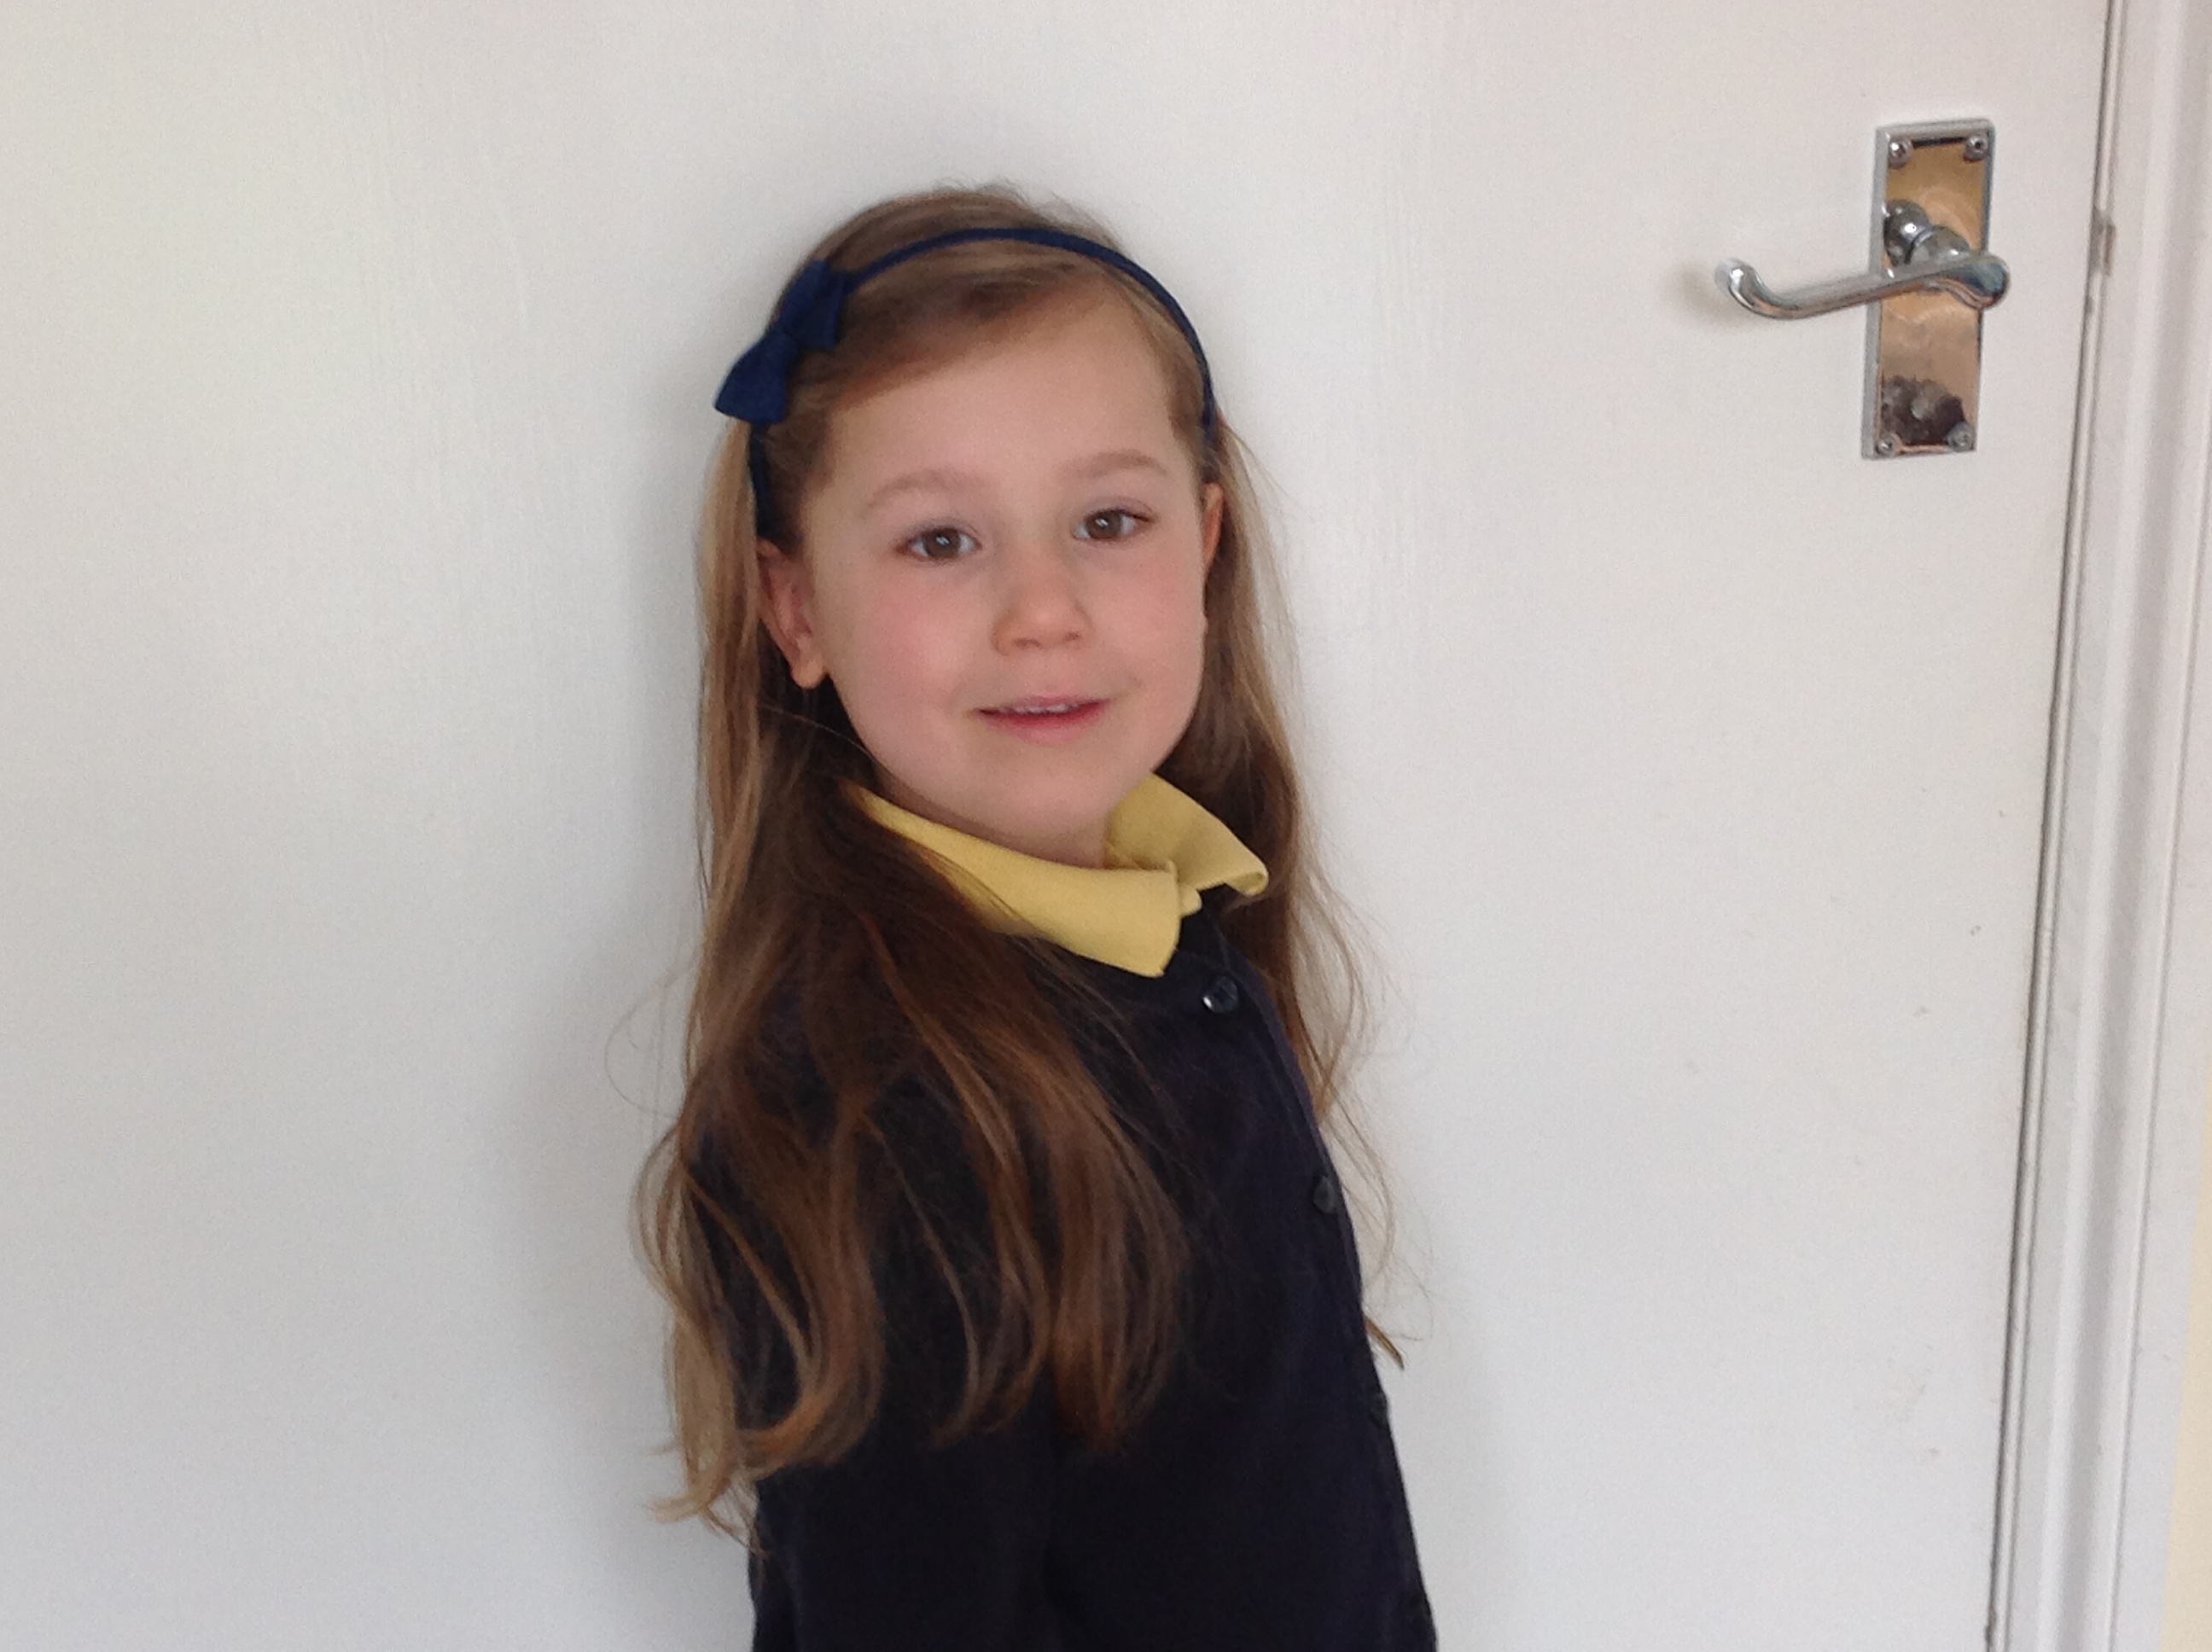 Crowdfunding To Donate Evie S Hair To The Little Princess Trust Whilst